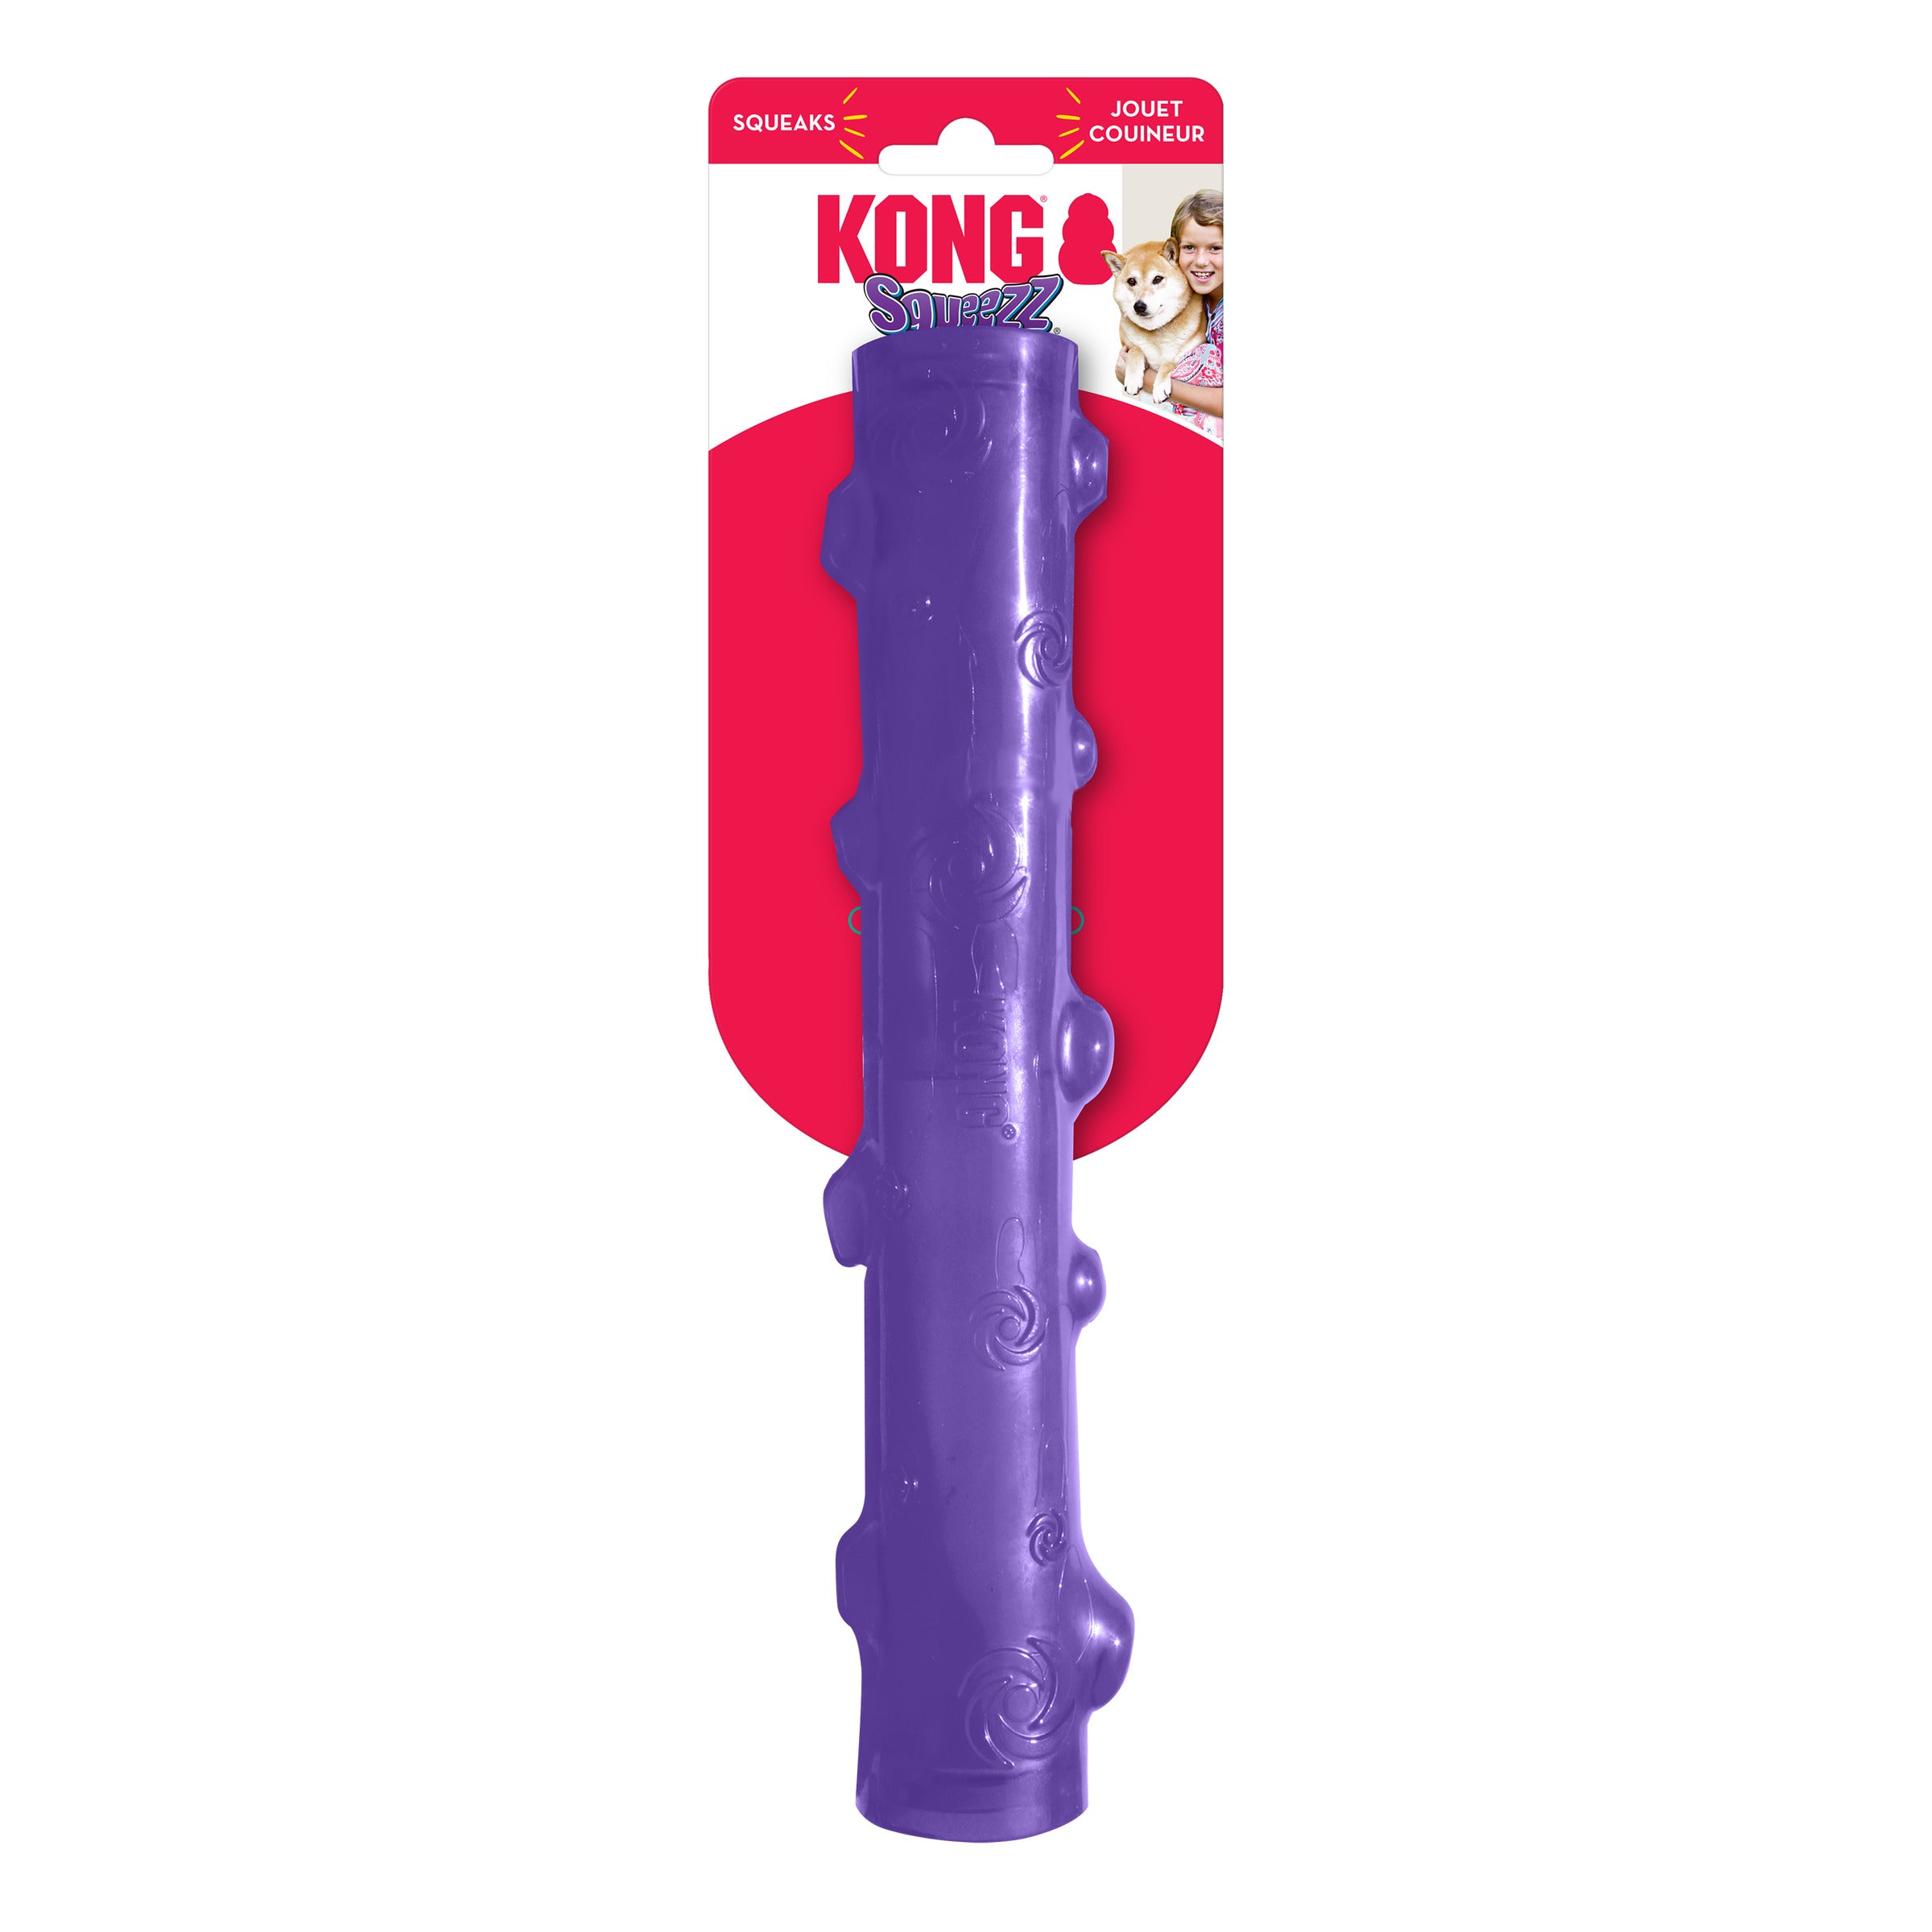 Kong Squeezz Stick, Assorted Colors, Dog Toy